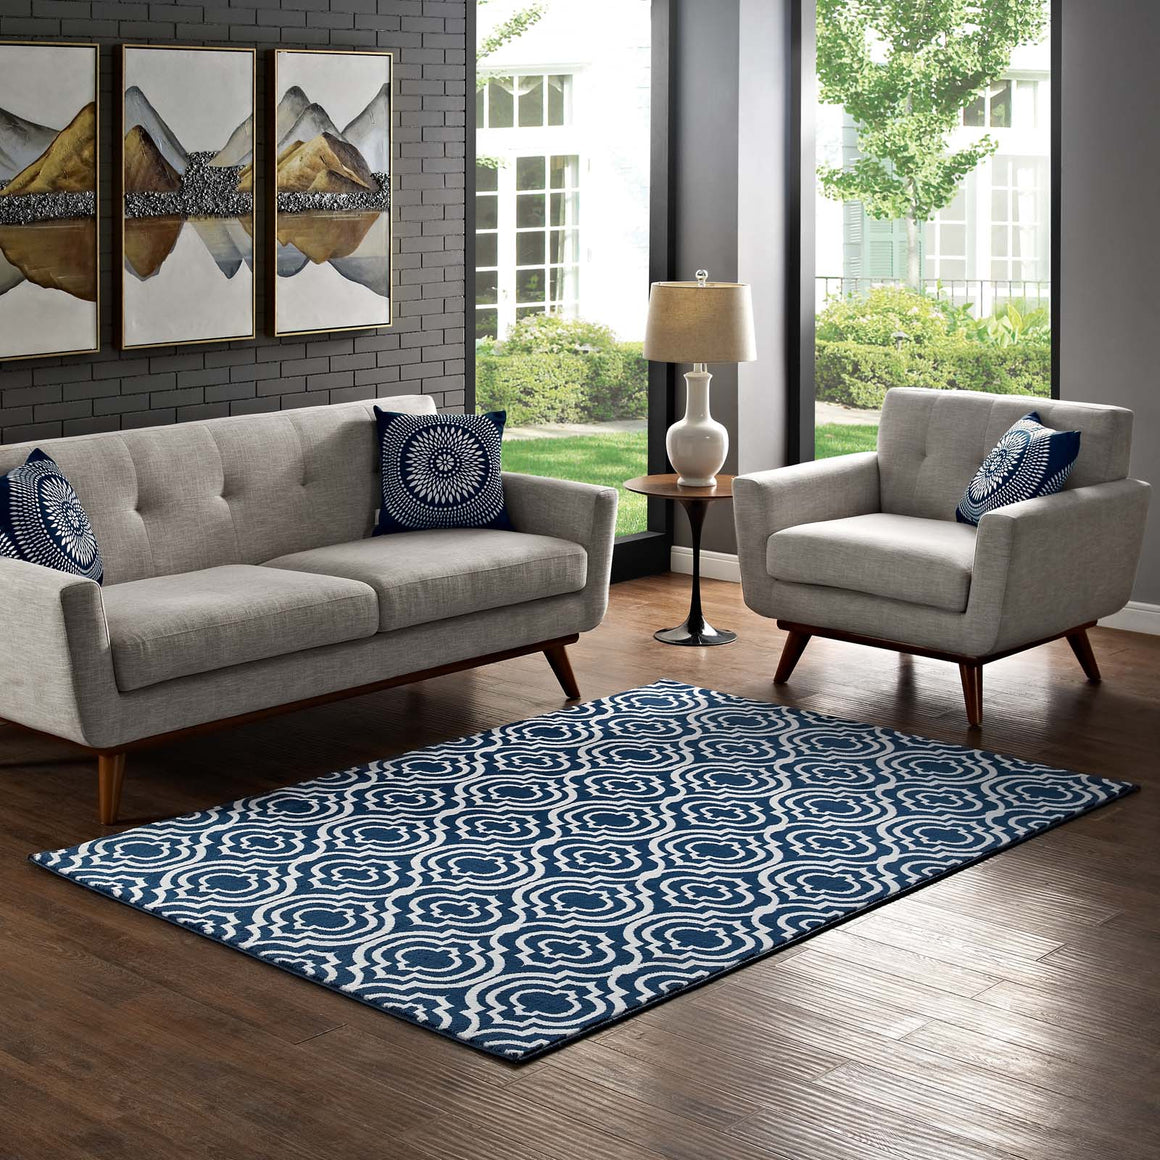 Frame Transitional Moroccan Trellis 5x8 Area Rug  Morcoccan Blue and Ivory